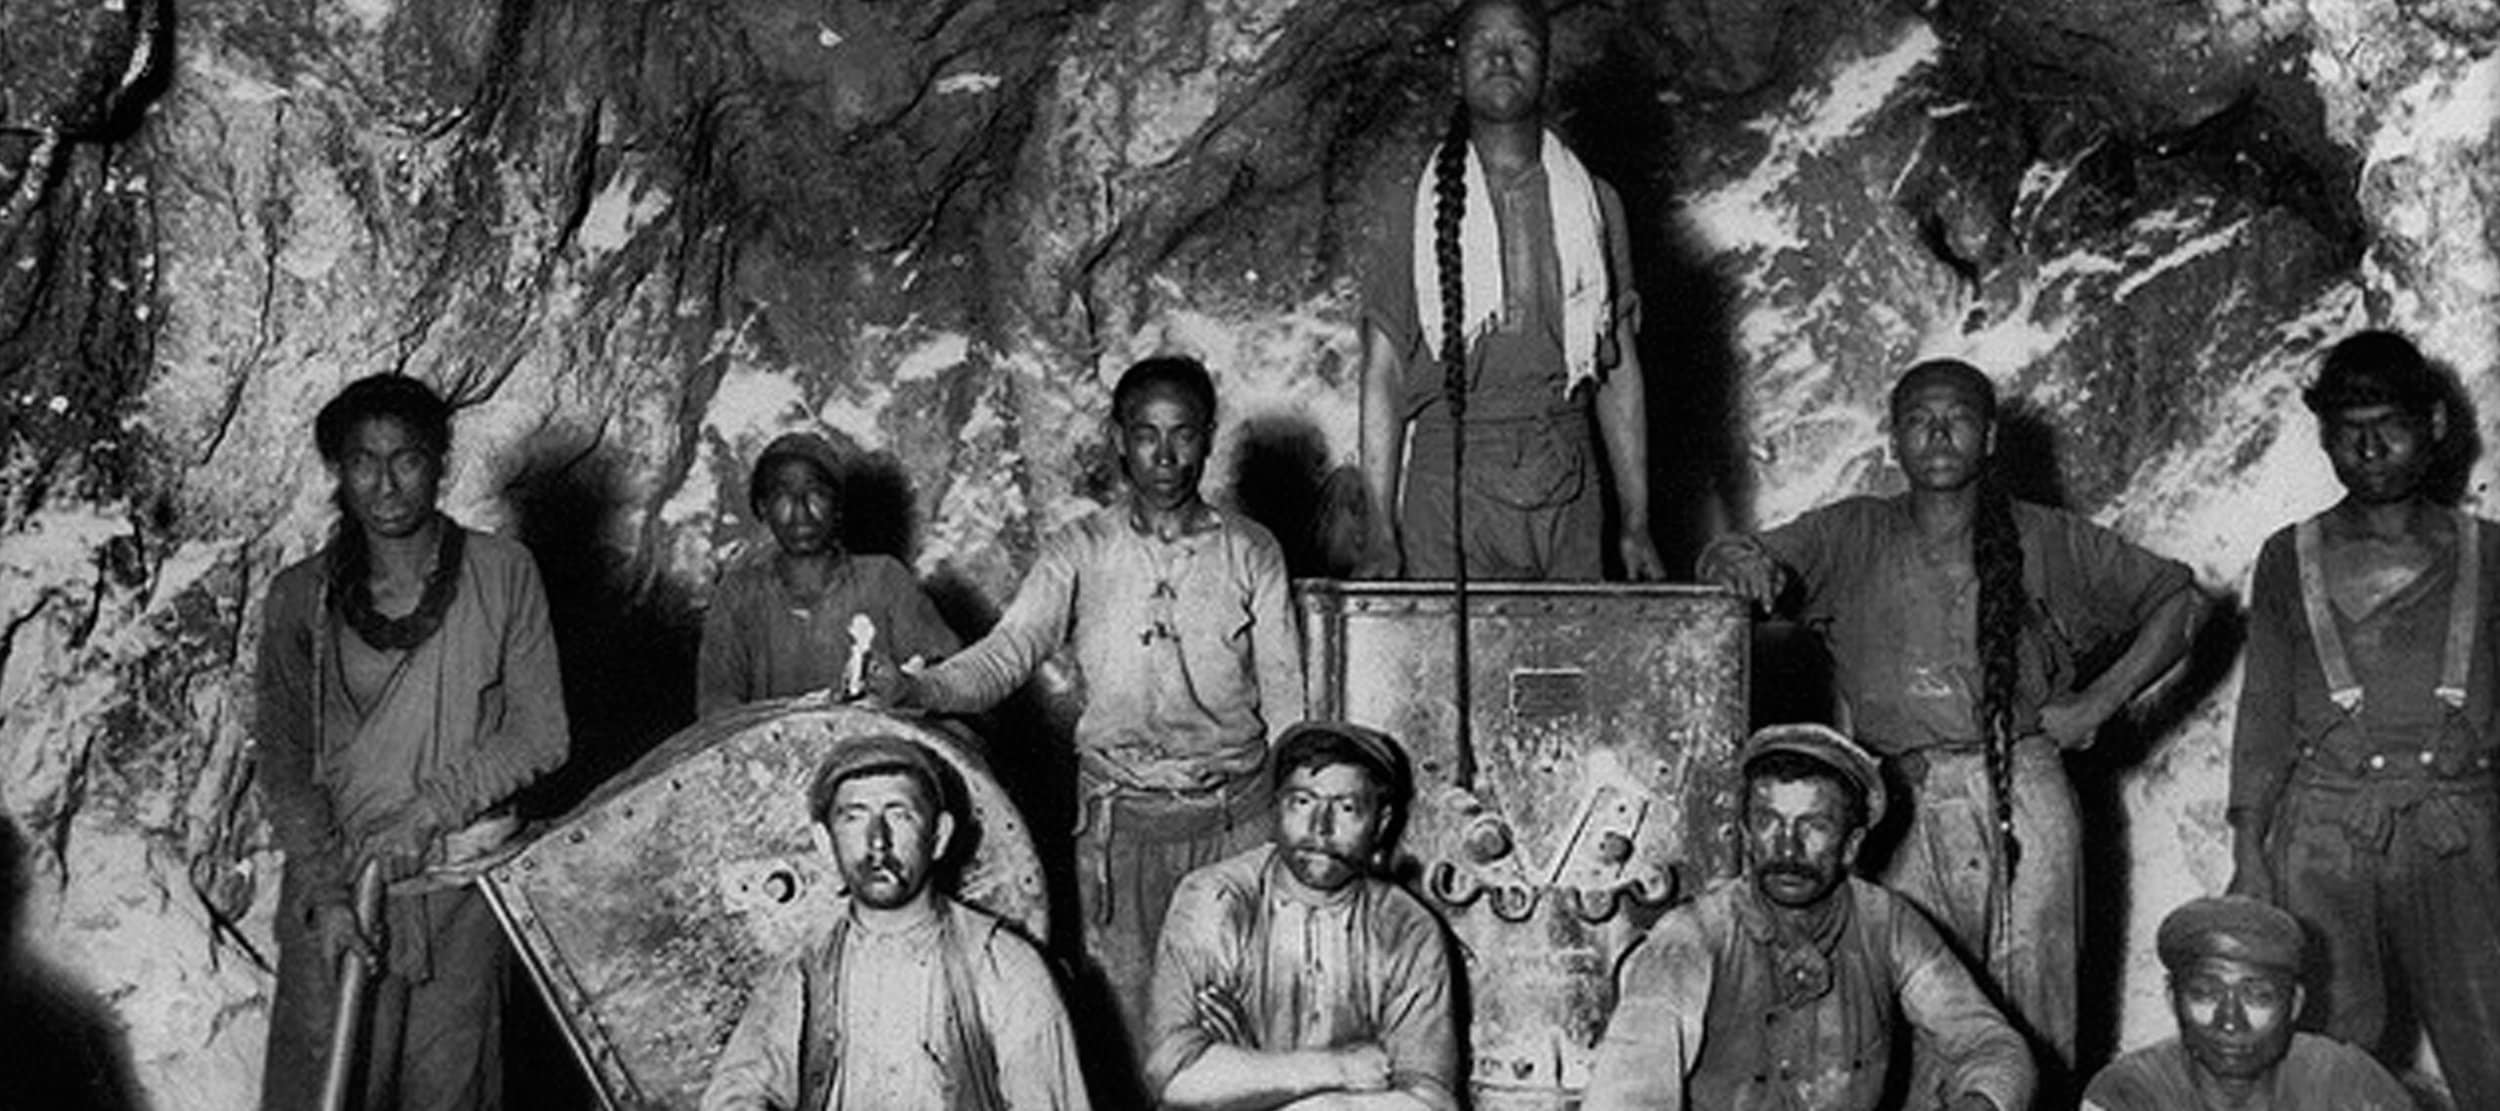 Chinese and White laborers in a gold mine in South Africa, probably Cornish miners